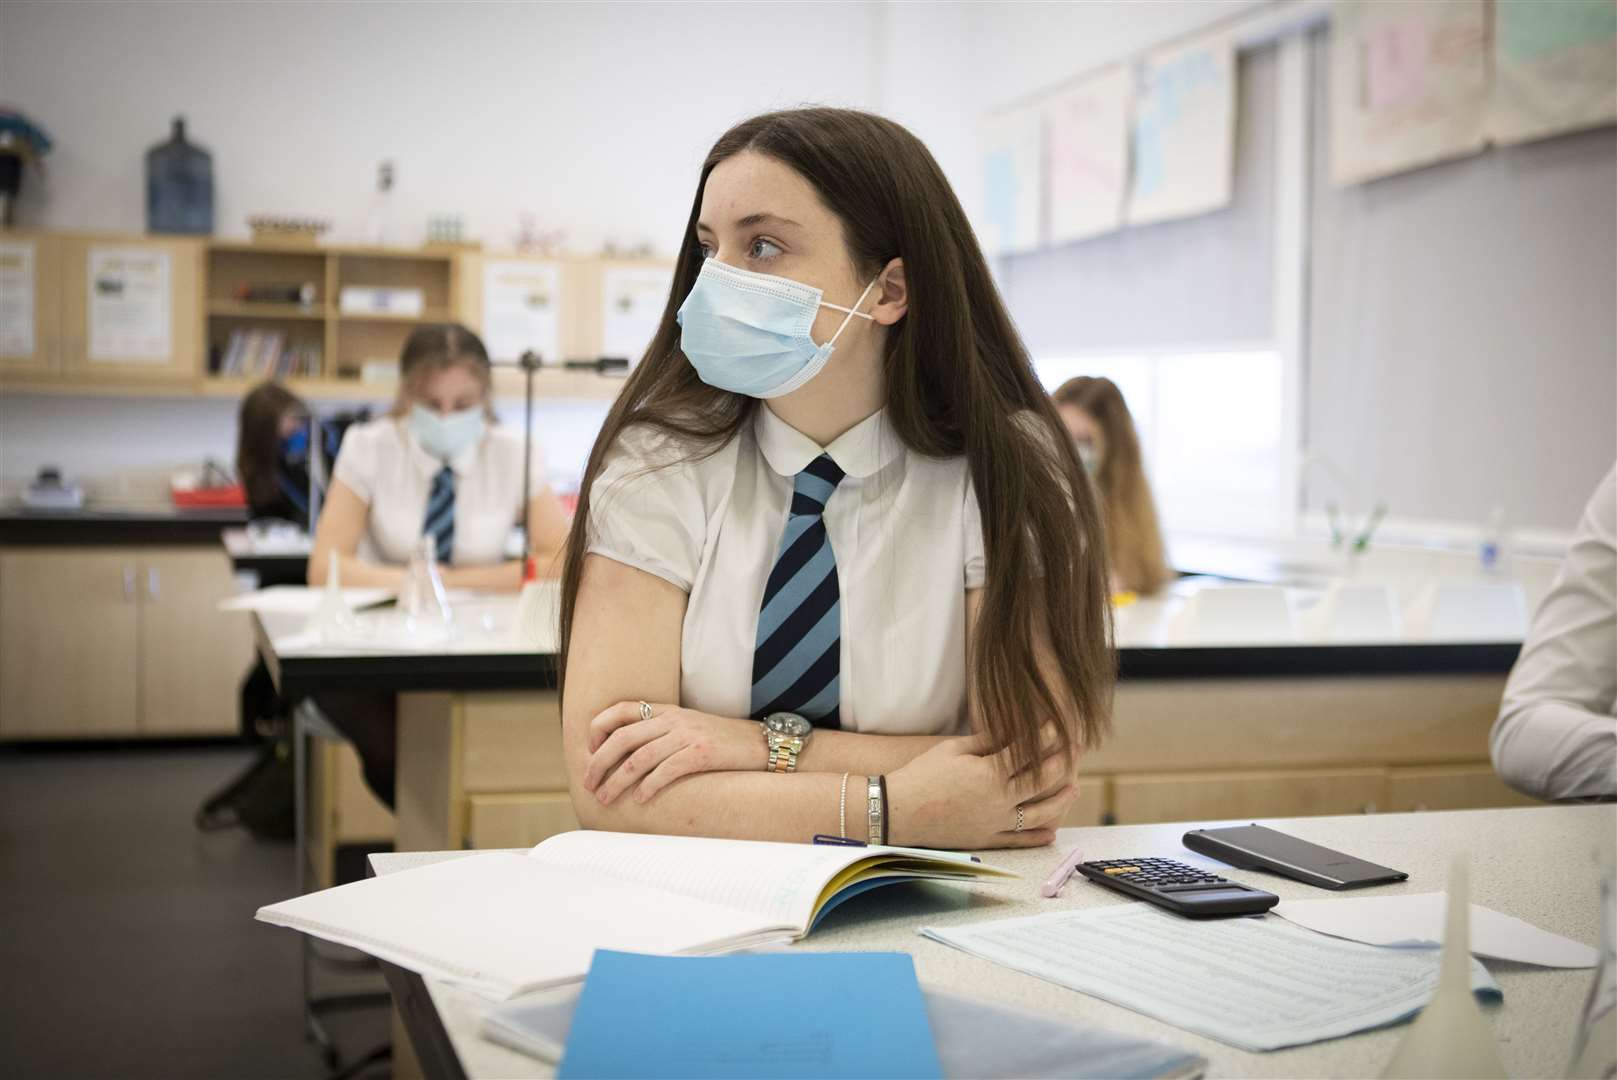 Secondary school pupils and teachers will still have to wear face masks, the First Minister said (Jane Barlow/PA)